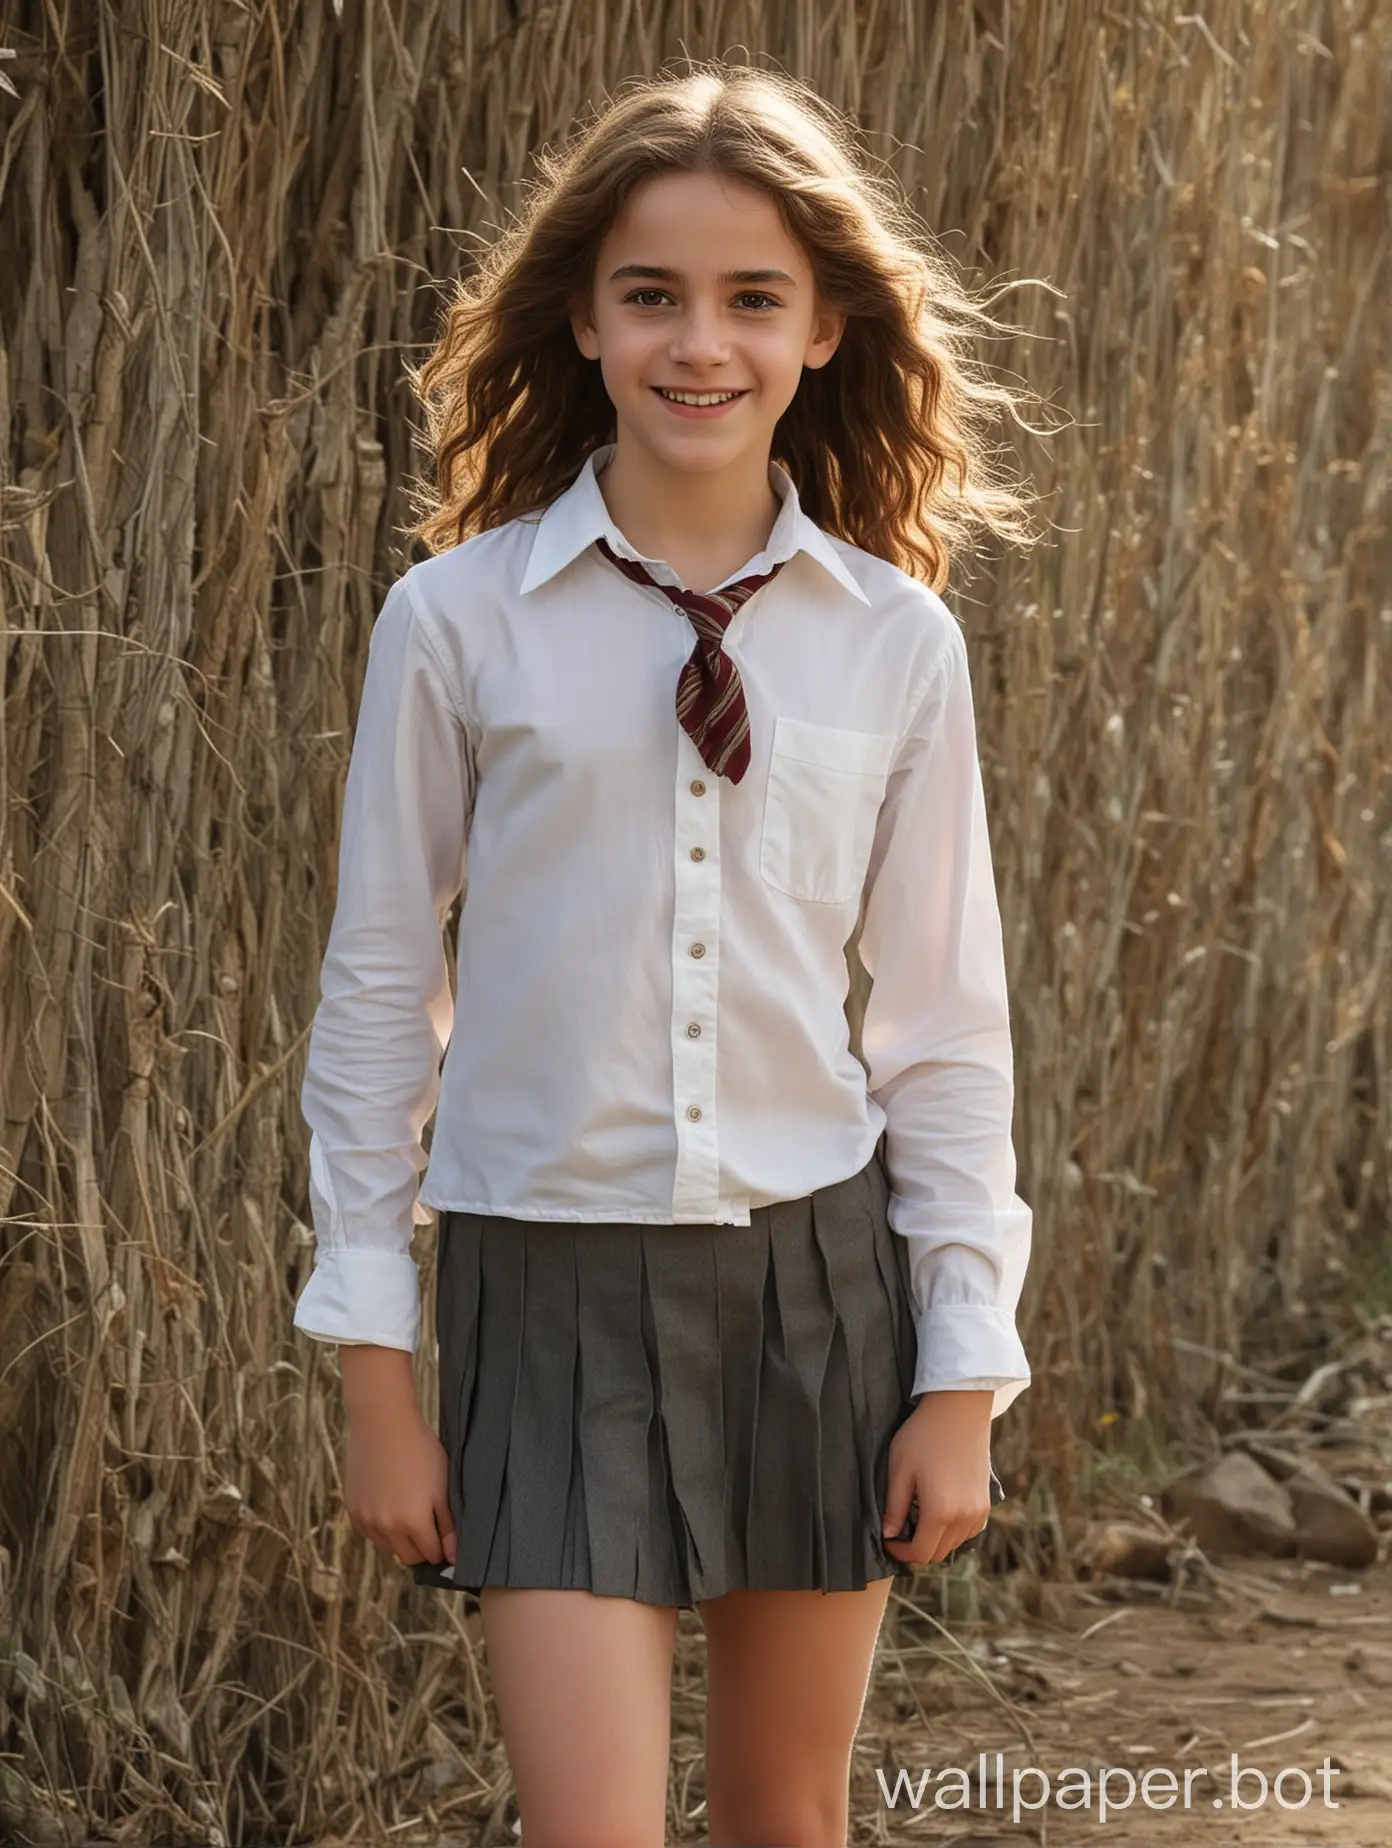 a girl of 11 years old, fully grown, Hermione Granger, against a natural background, light clothing, short skirt, smile, unbuttoned shirt